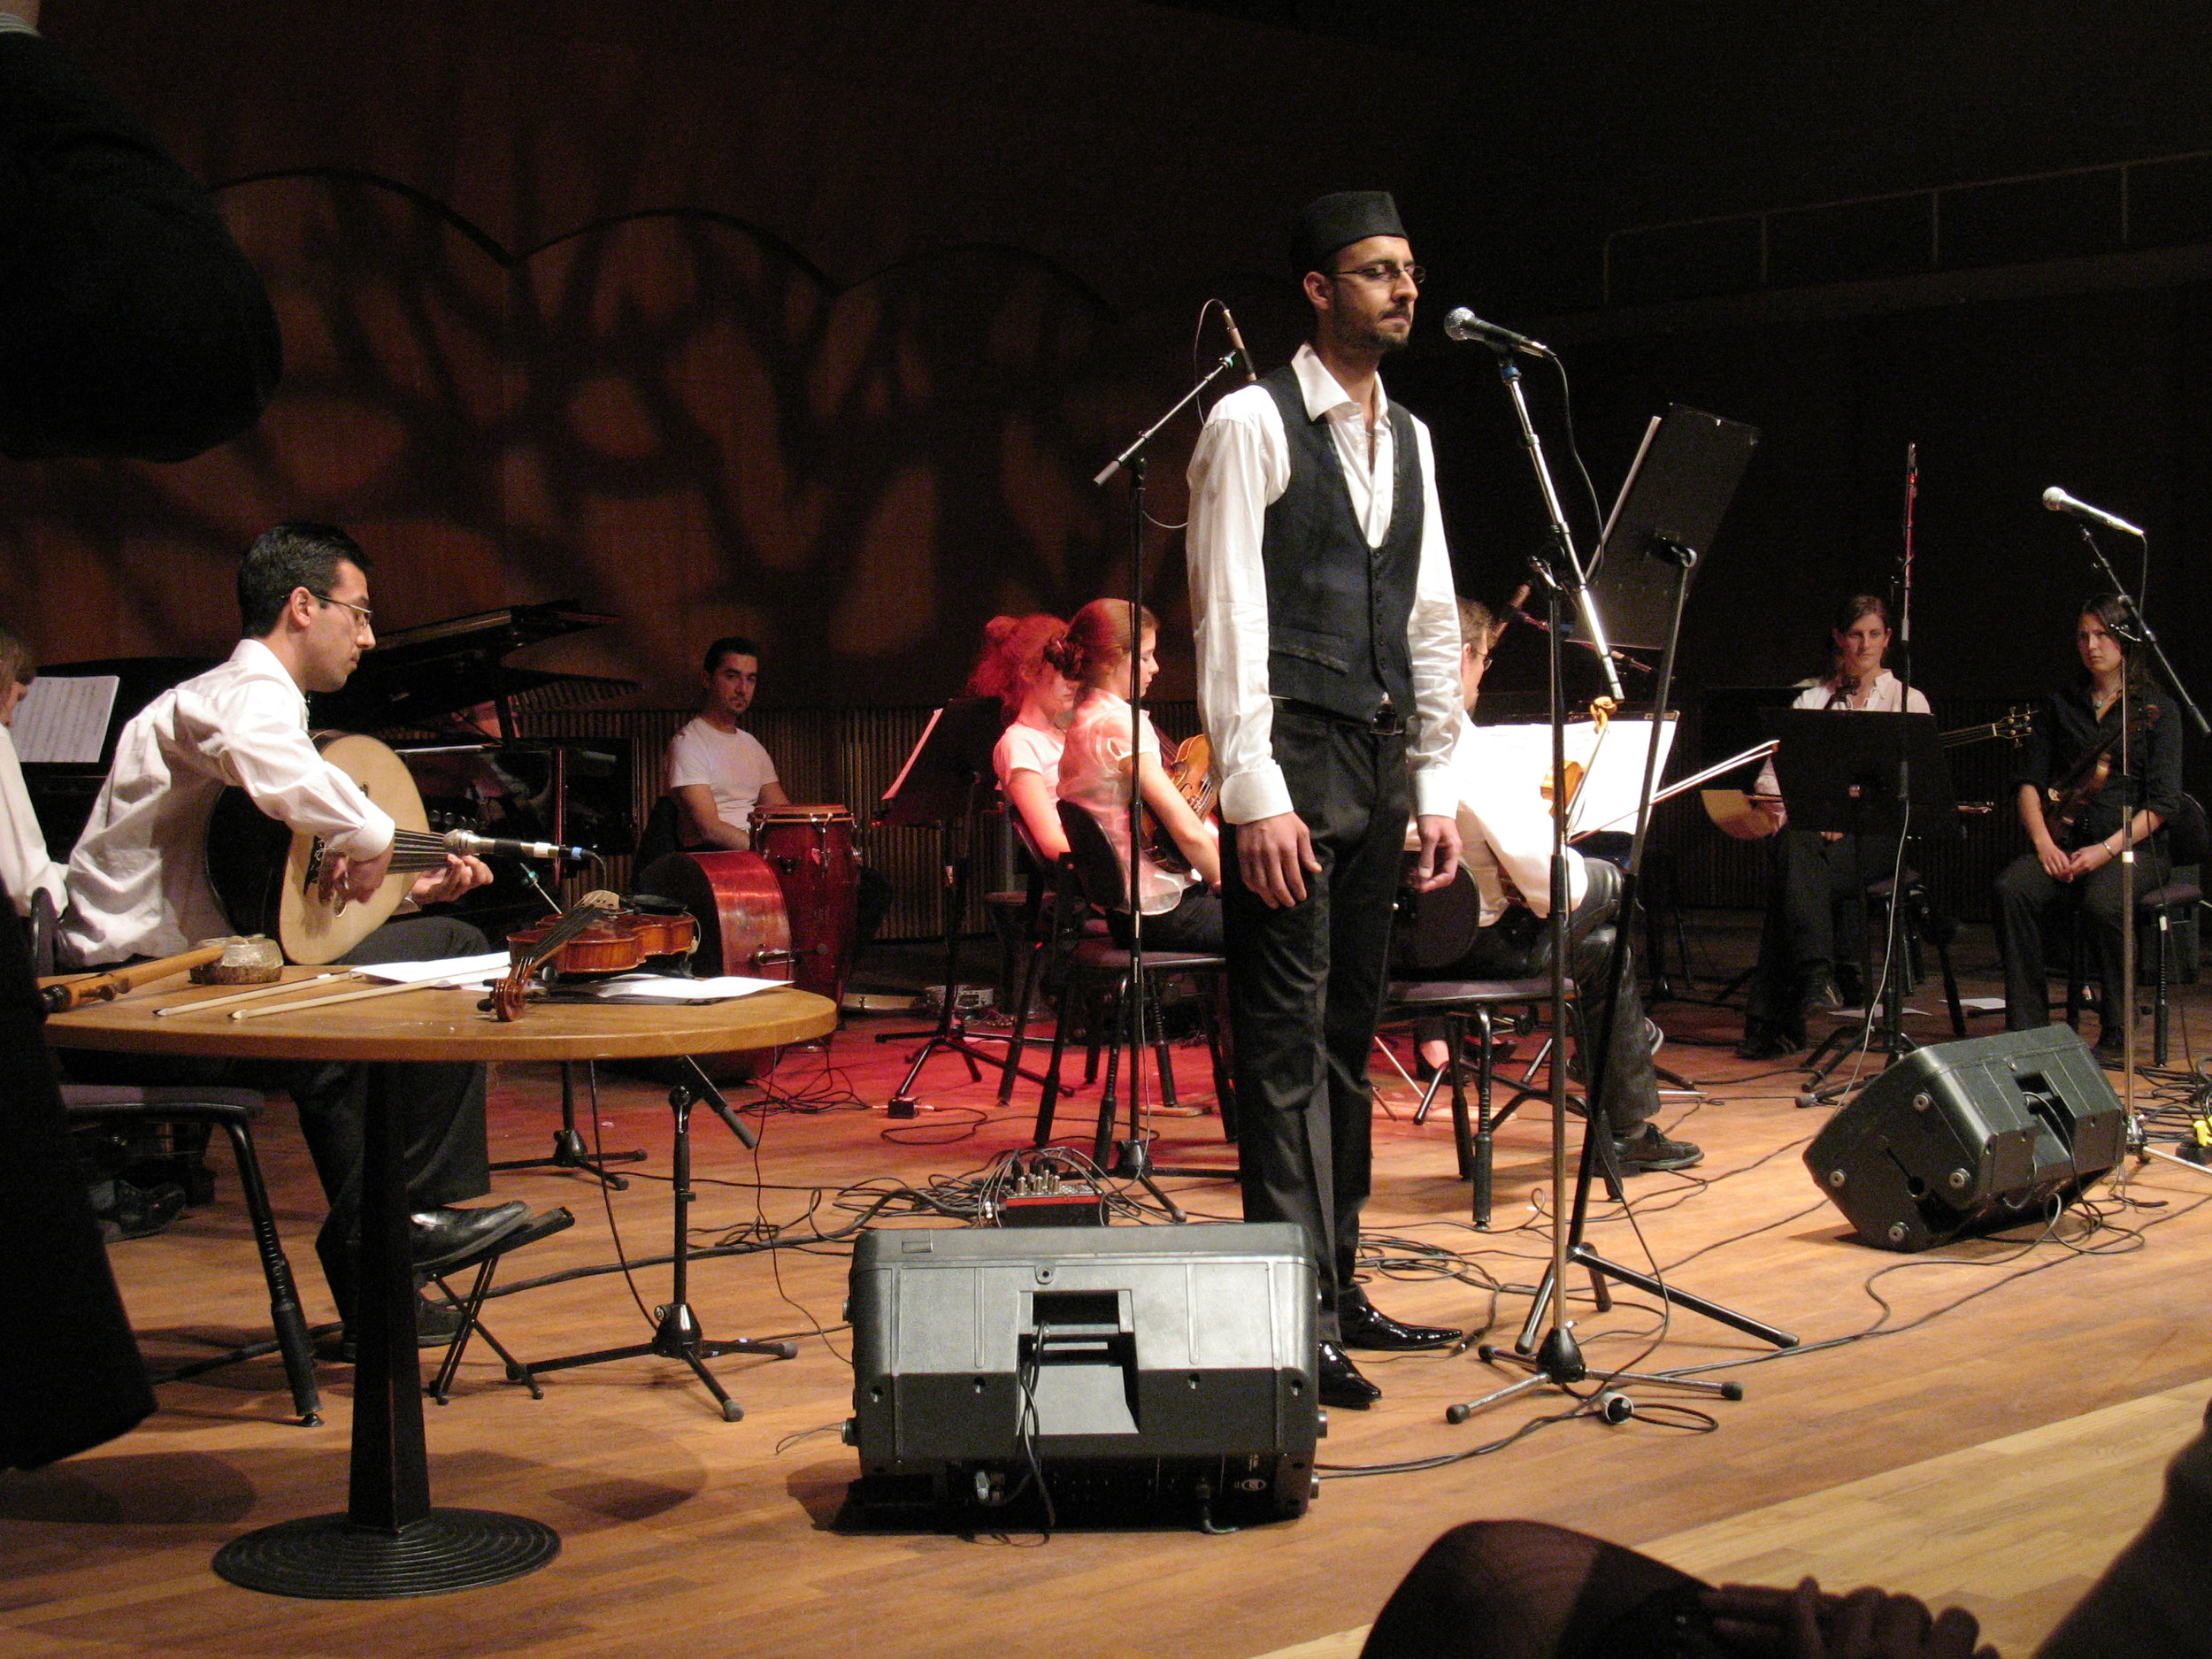 Pictures from the examination concert 023.jpg